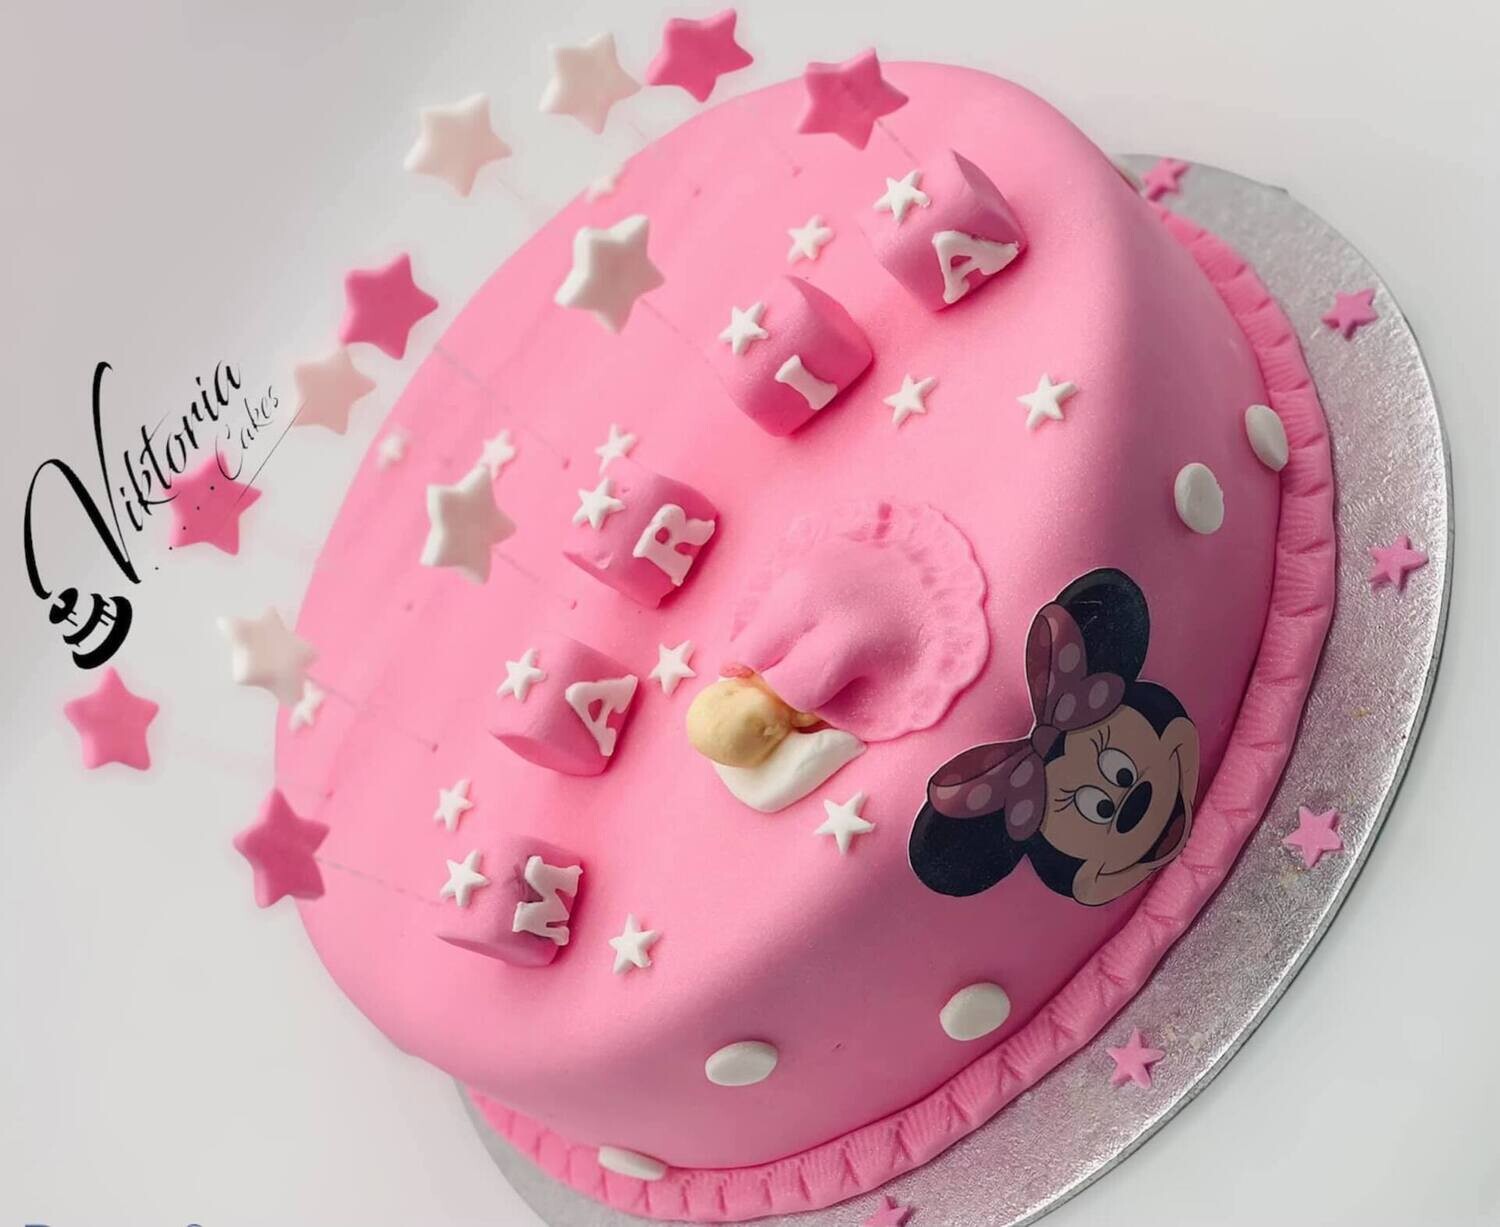 Minnie Mouse Pink & White Fondant Cake Delivery in Delhi NCR - ₹4,499.00  Cake Express